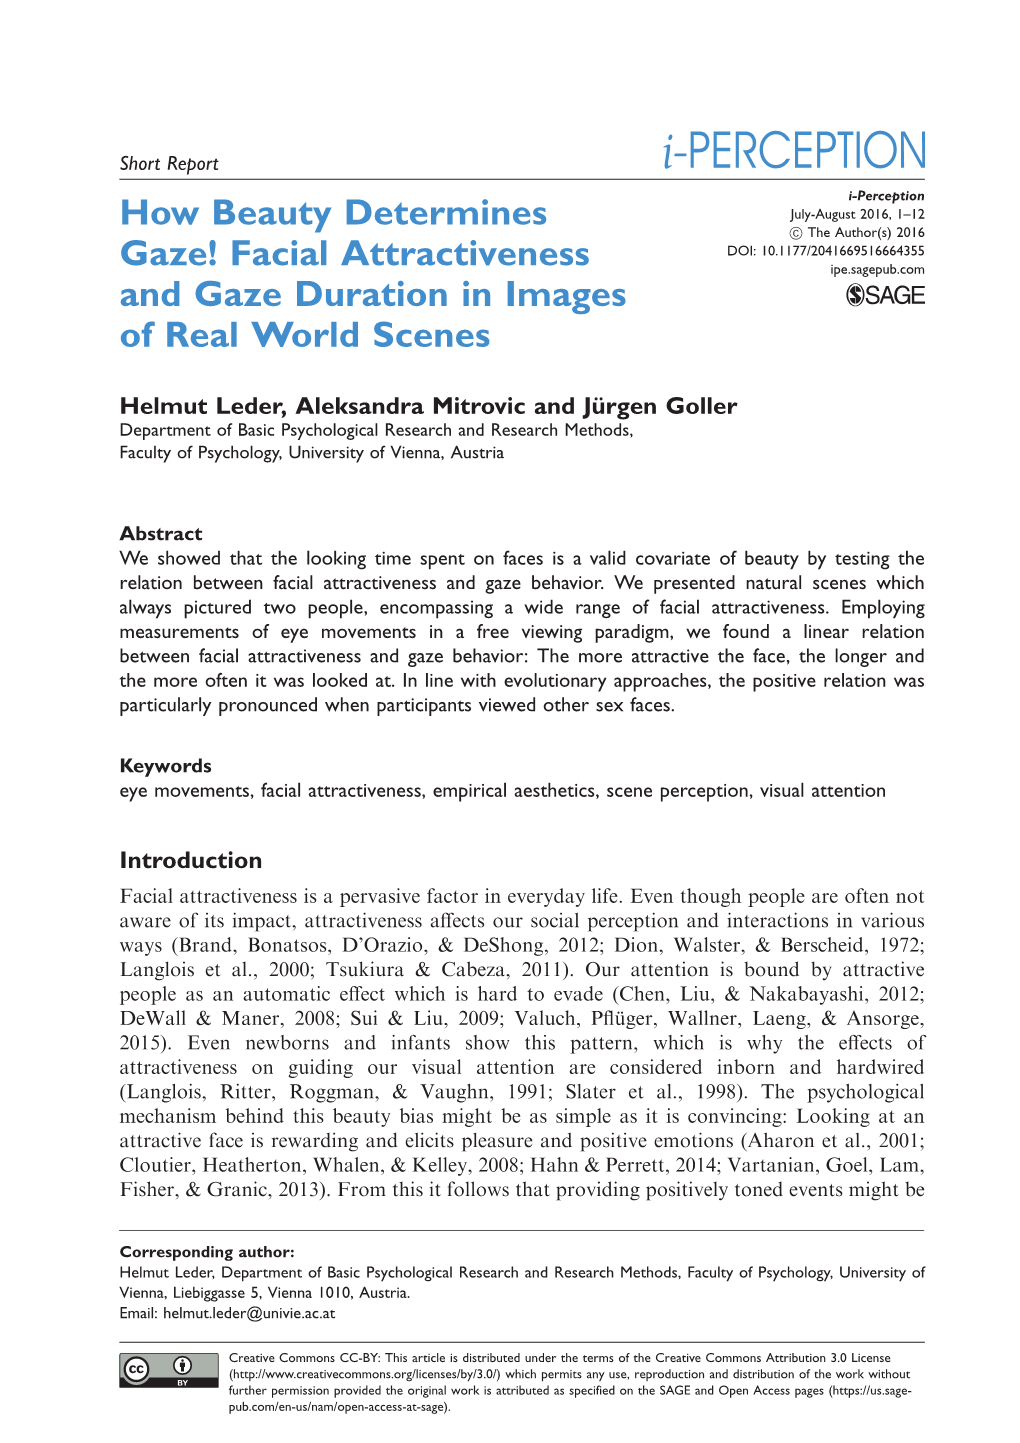 Facial Attractiveness and Gaze Duration in Images